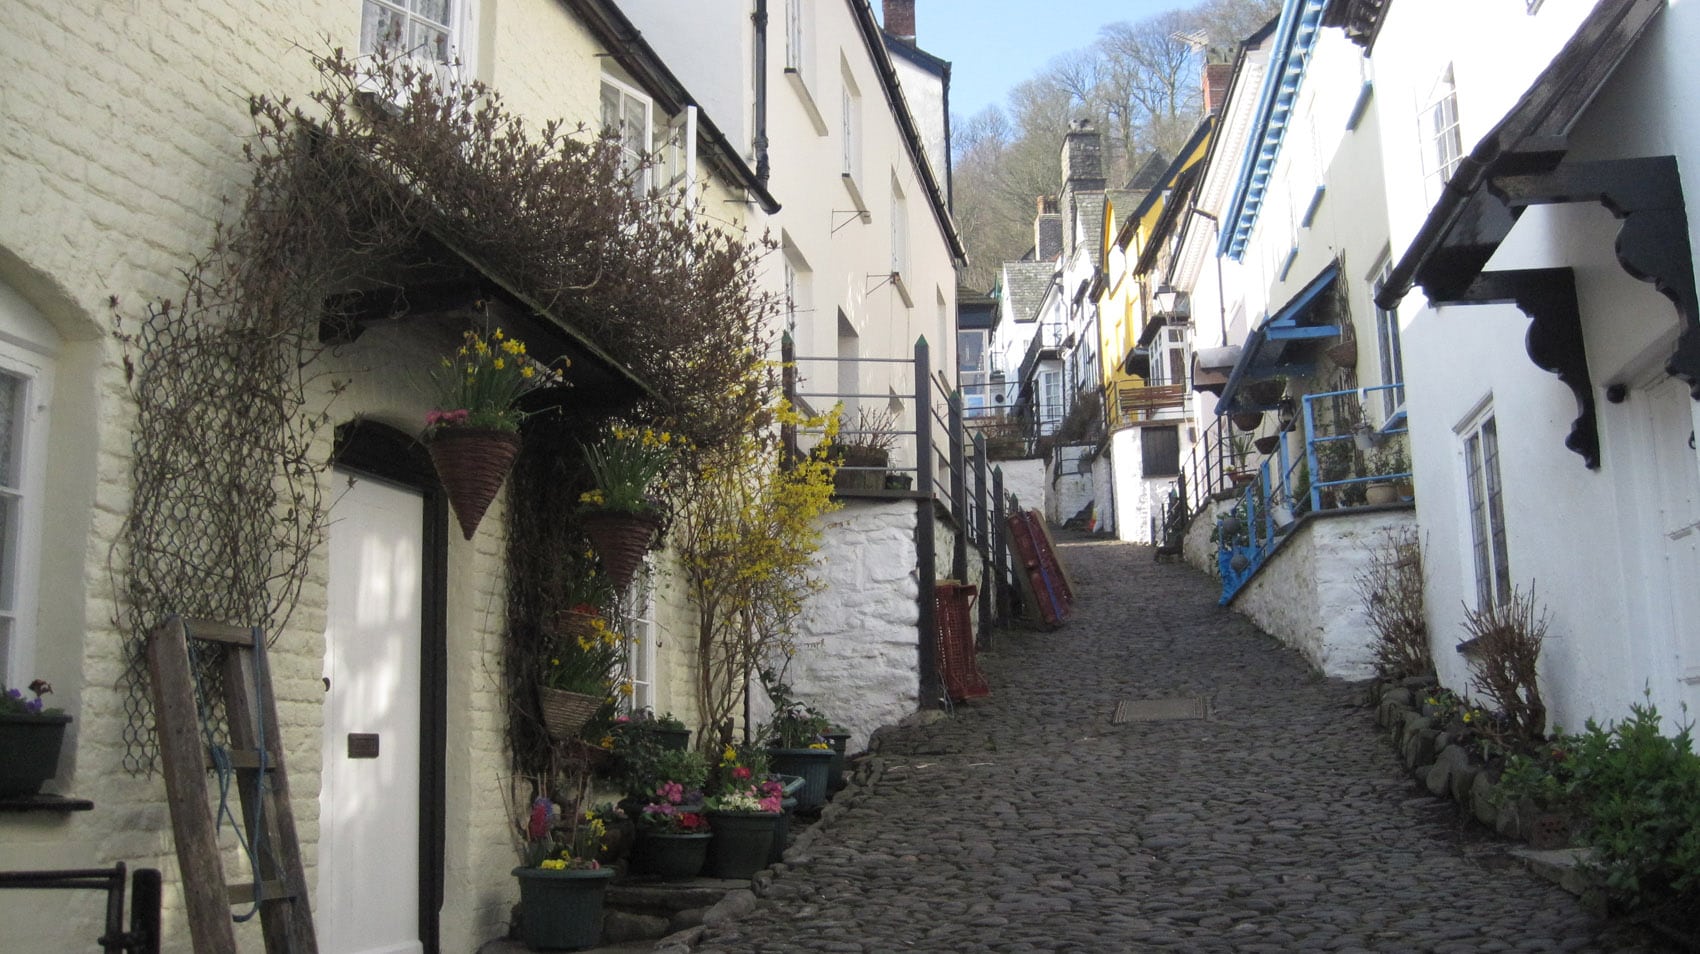 A Pawfect Weekend in Clovelly by Kate Taylors blog “dotty4paws”